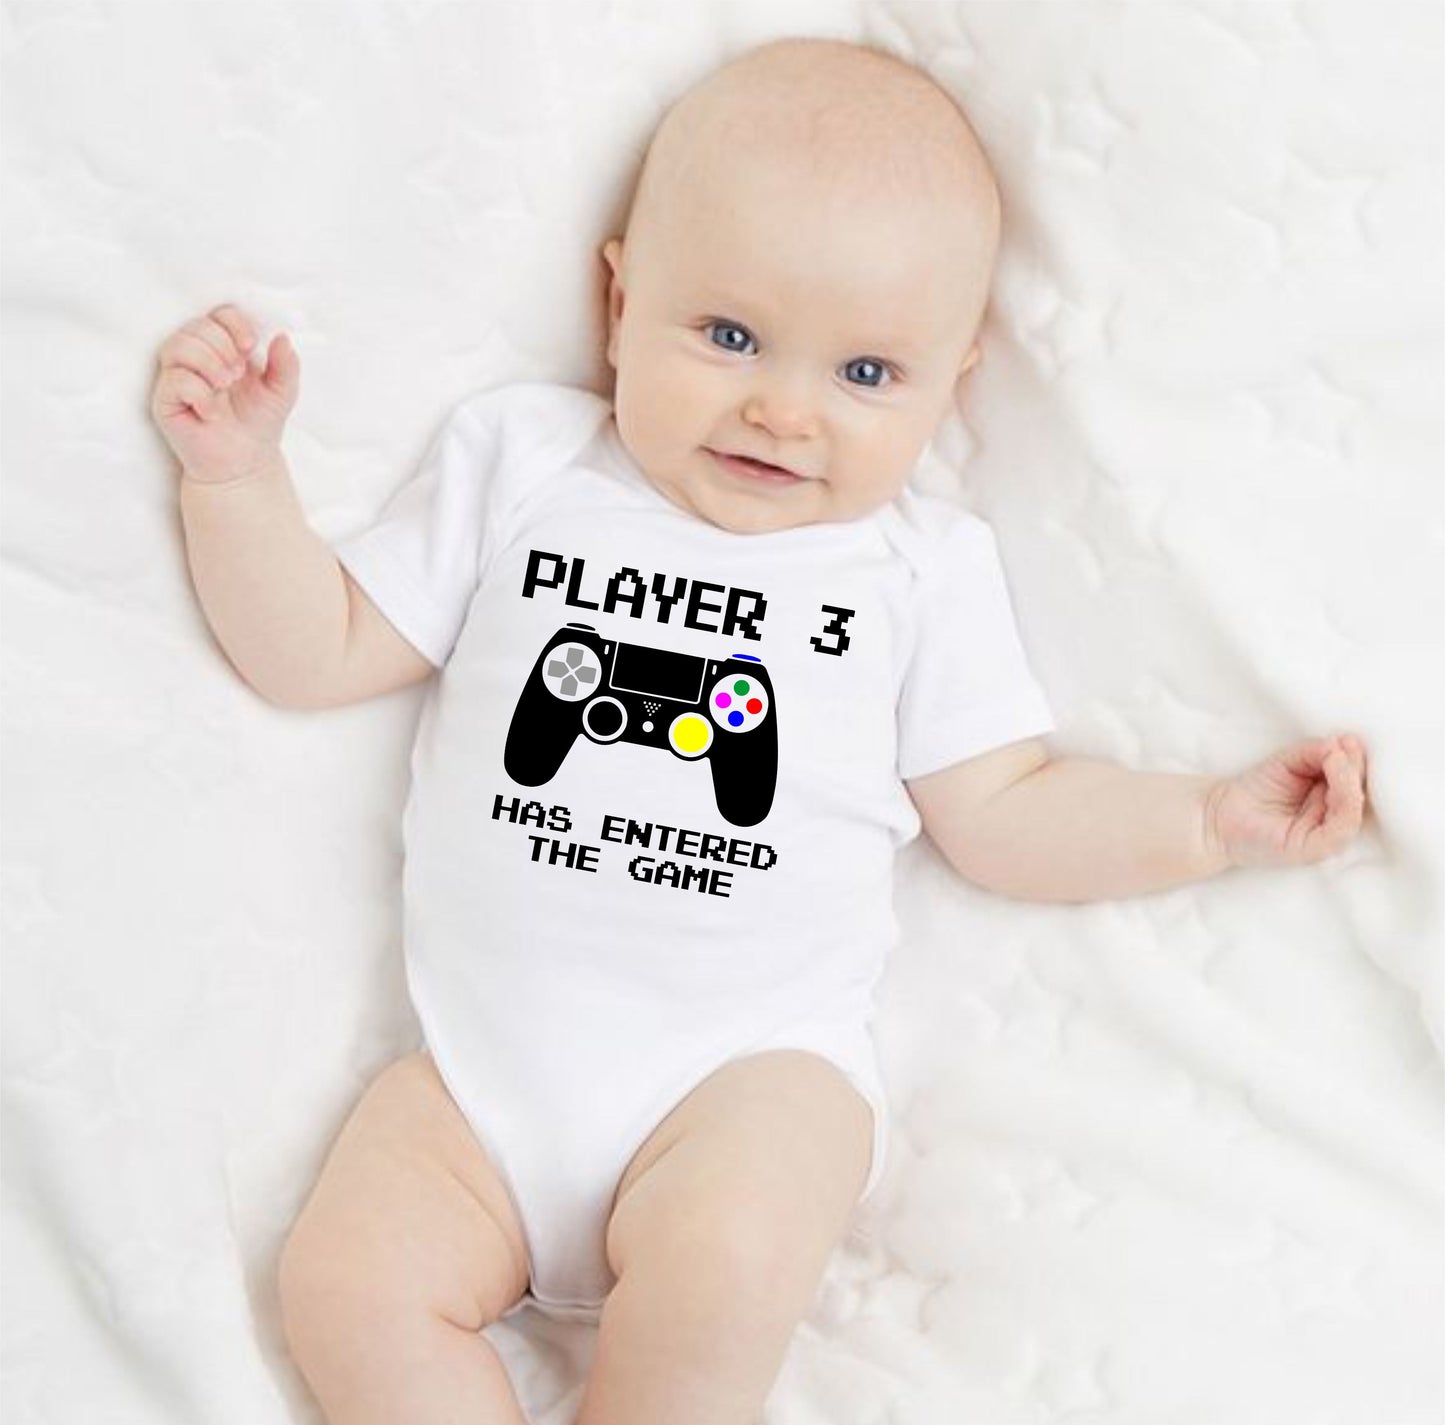 Baby Statement Onesies - Player 3 has entered the game